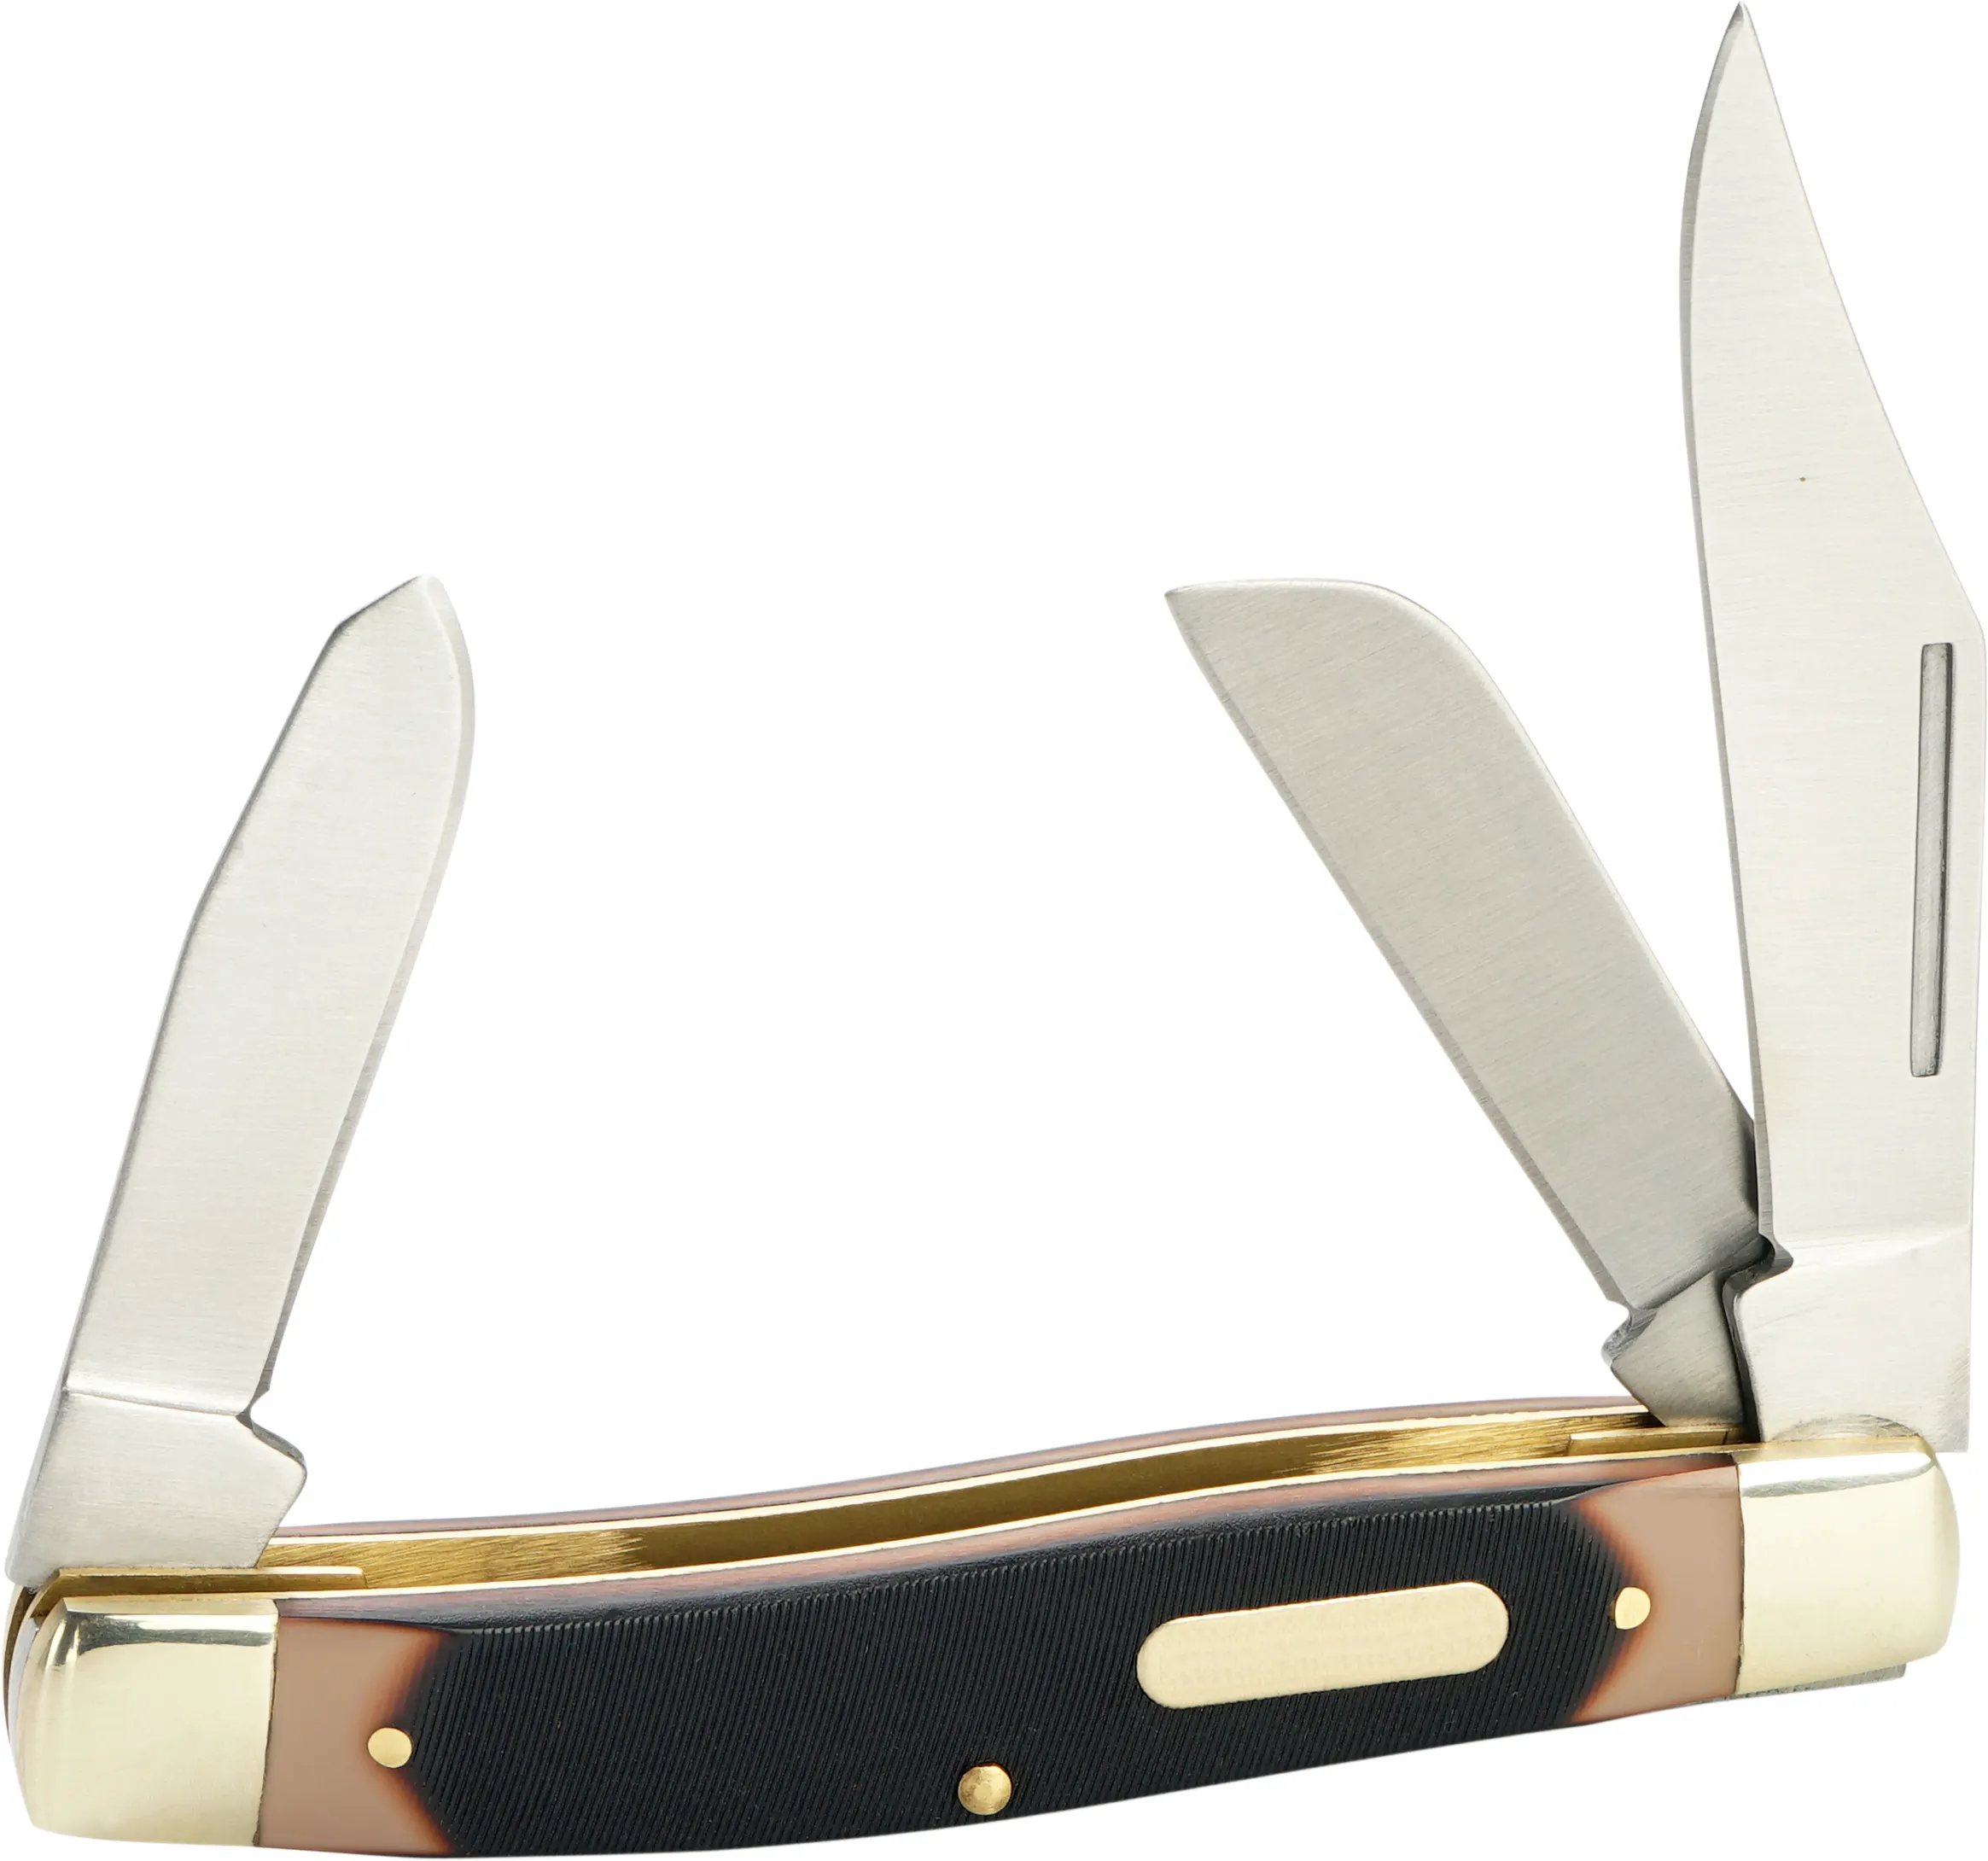 Good Quality Hunting Bowie Camping Multi Functional Pocket Knife